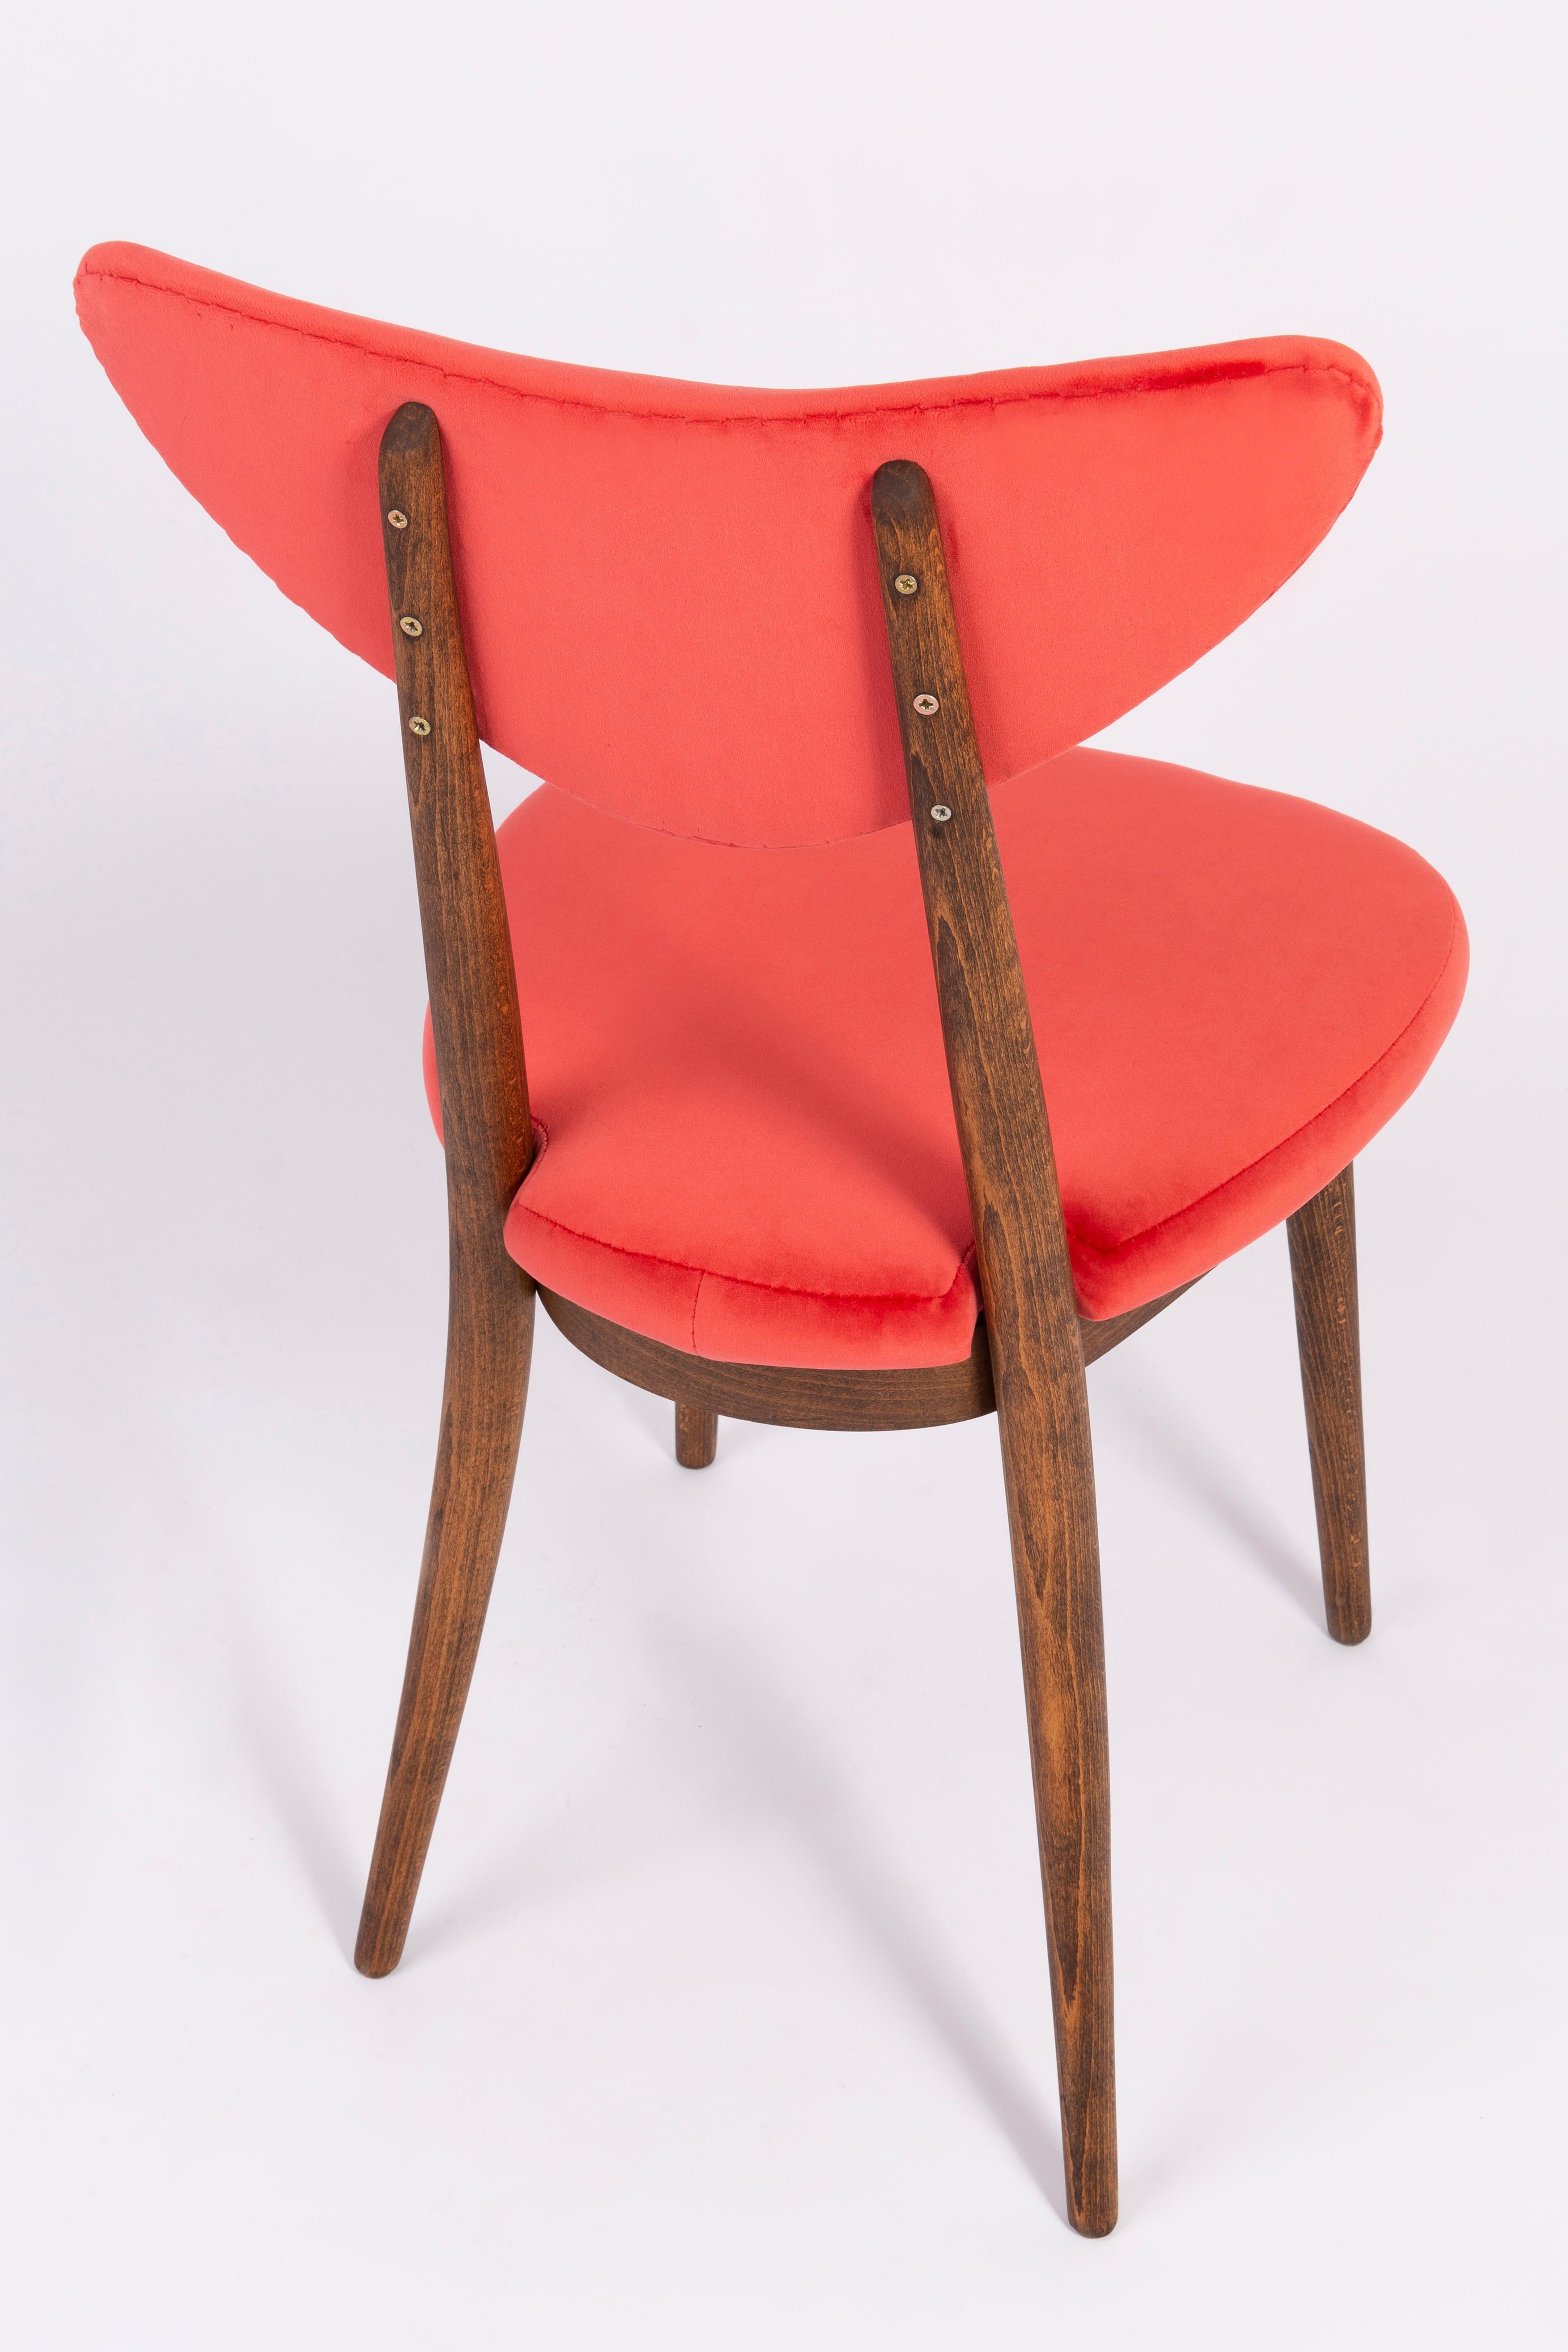 Pair of Red Heart Chairs, Poland, 1960s For Sale 1